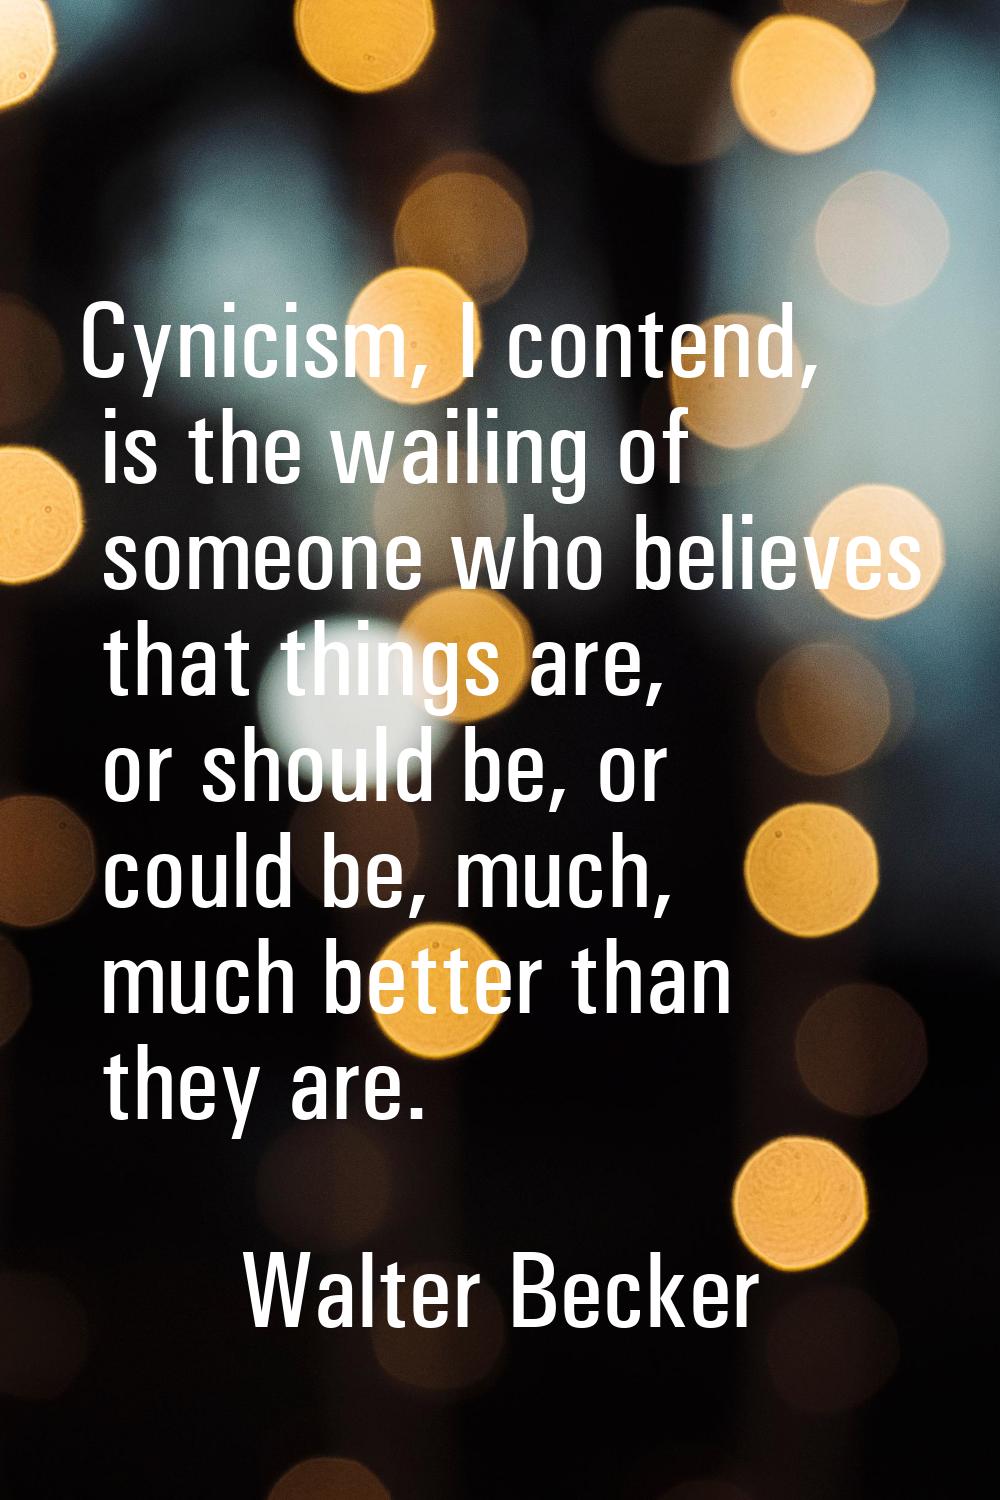 Cynicism, I contend, is the wailing of someone who believes that things are, or should be, or could